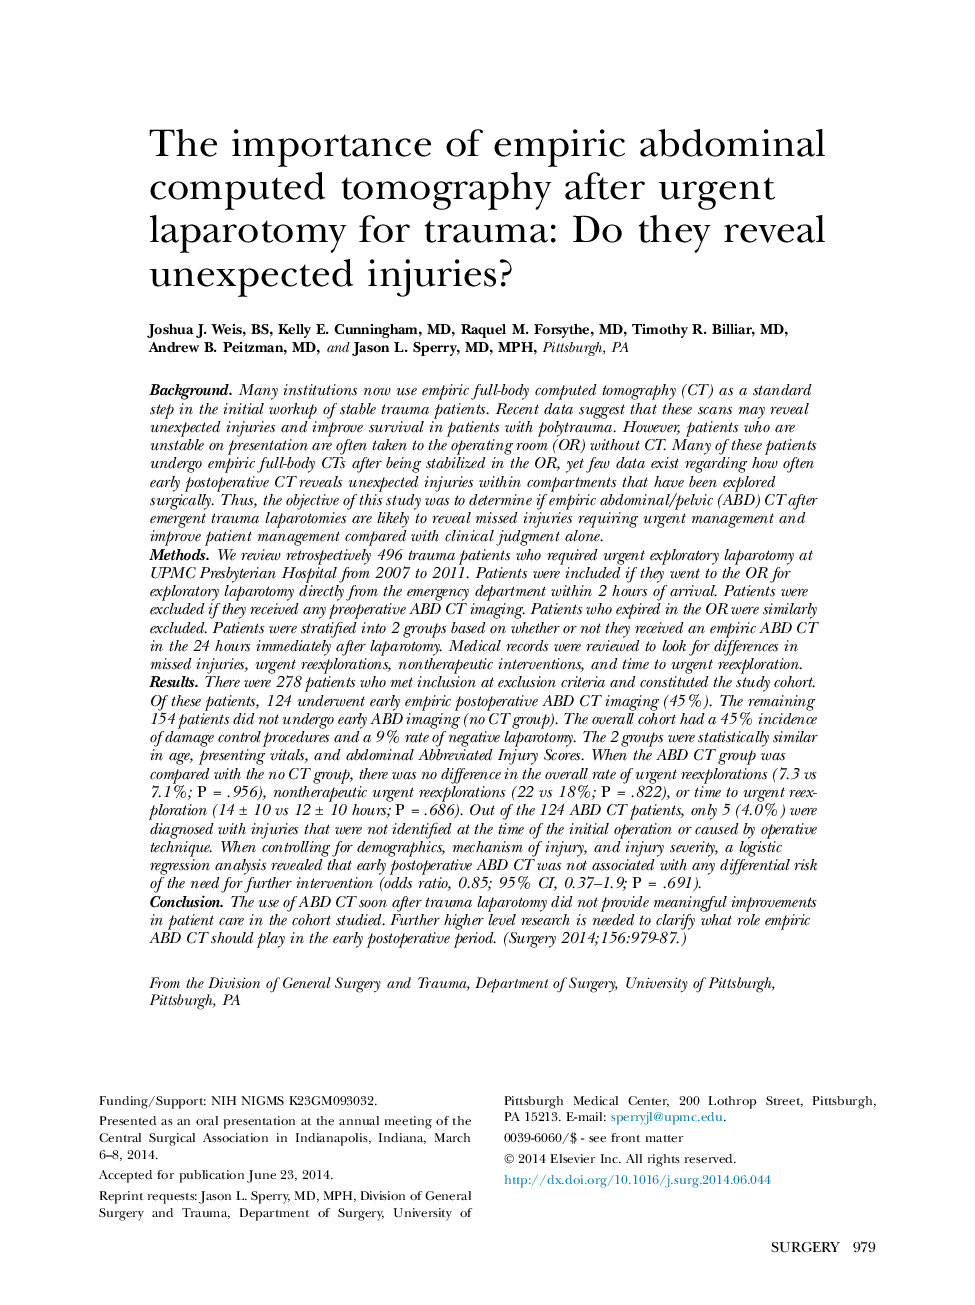 The importance of empiric abdominal computed tomography after urgent laparotomy for trauma: Do they reveal unexpected injuries? 